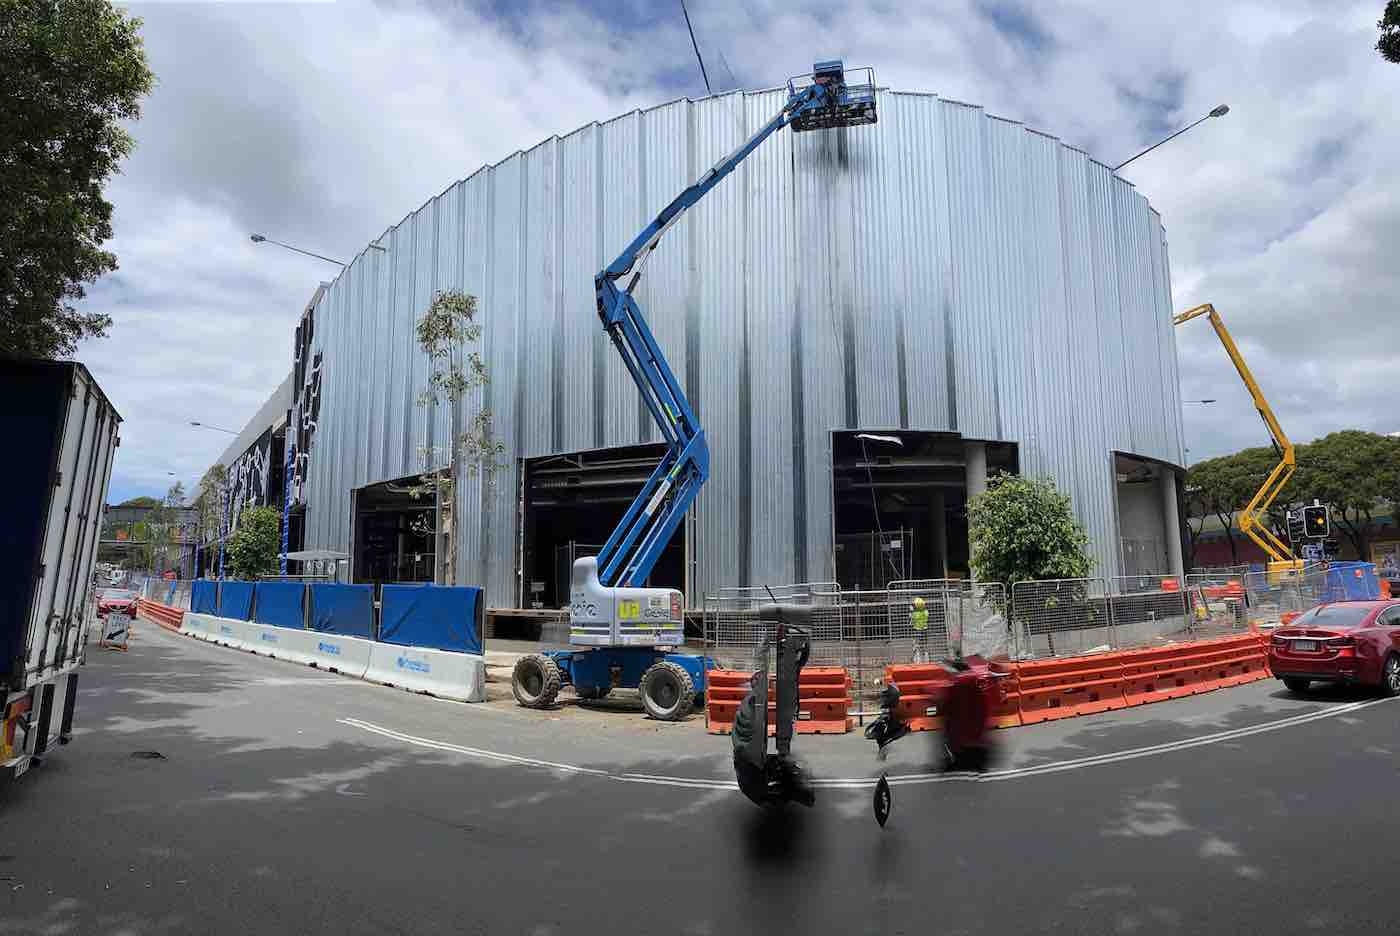 Metal Roof Contracting - Marrickville Metro Shopping Centre - Progress is well underway at Marrickville Metro for roofing and walling, on target for completion by